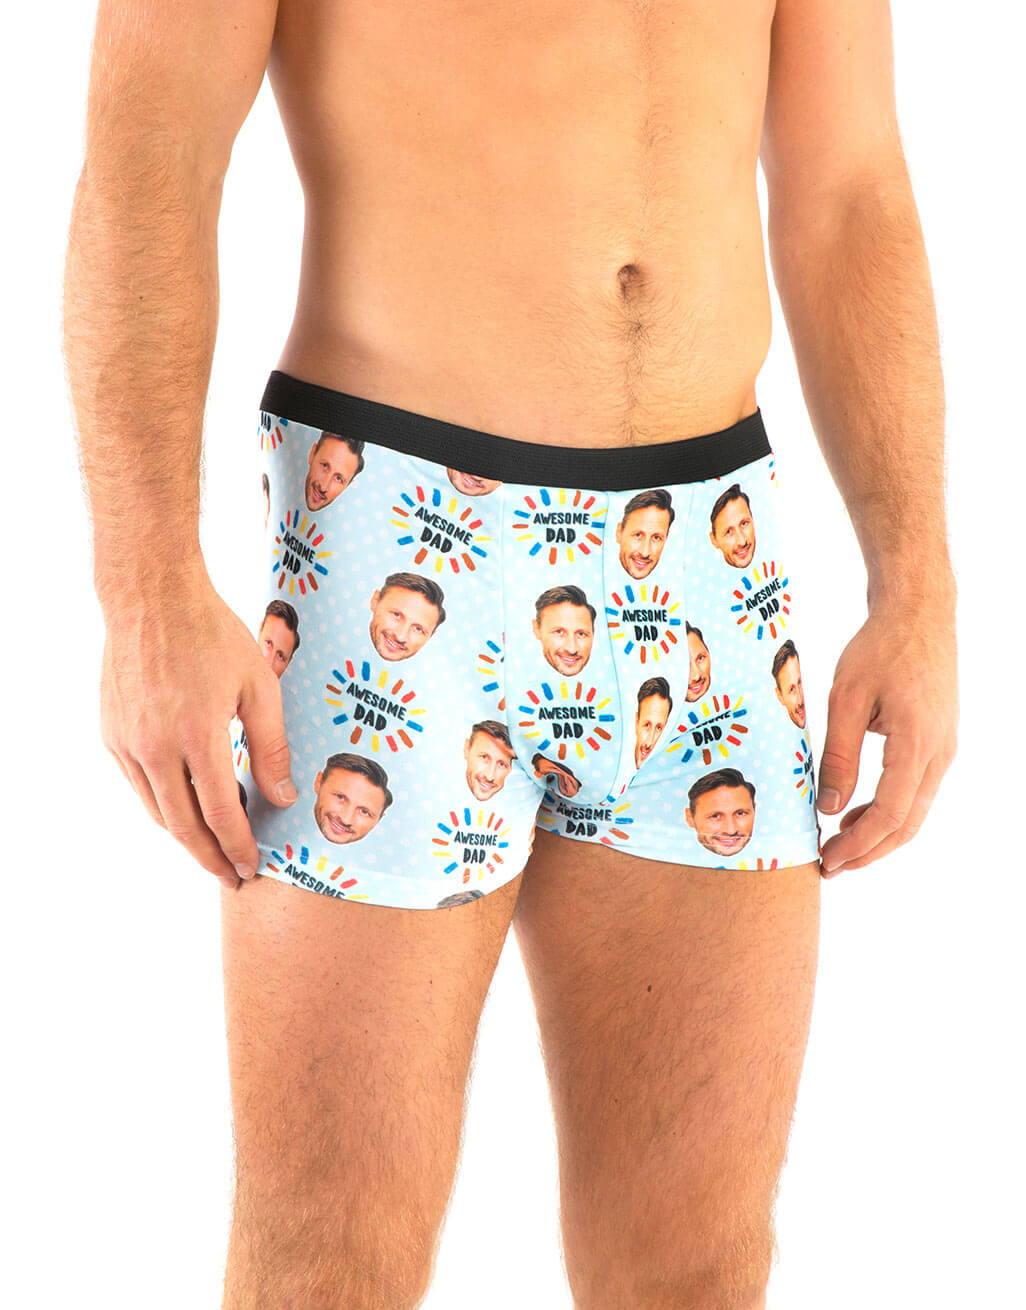 Awesome Dad Photo Boxers